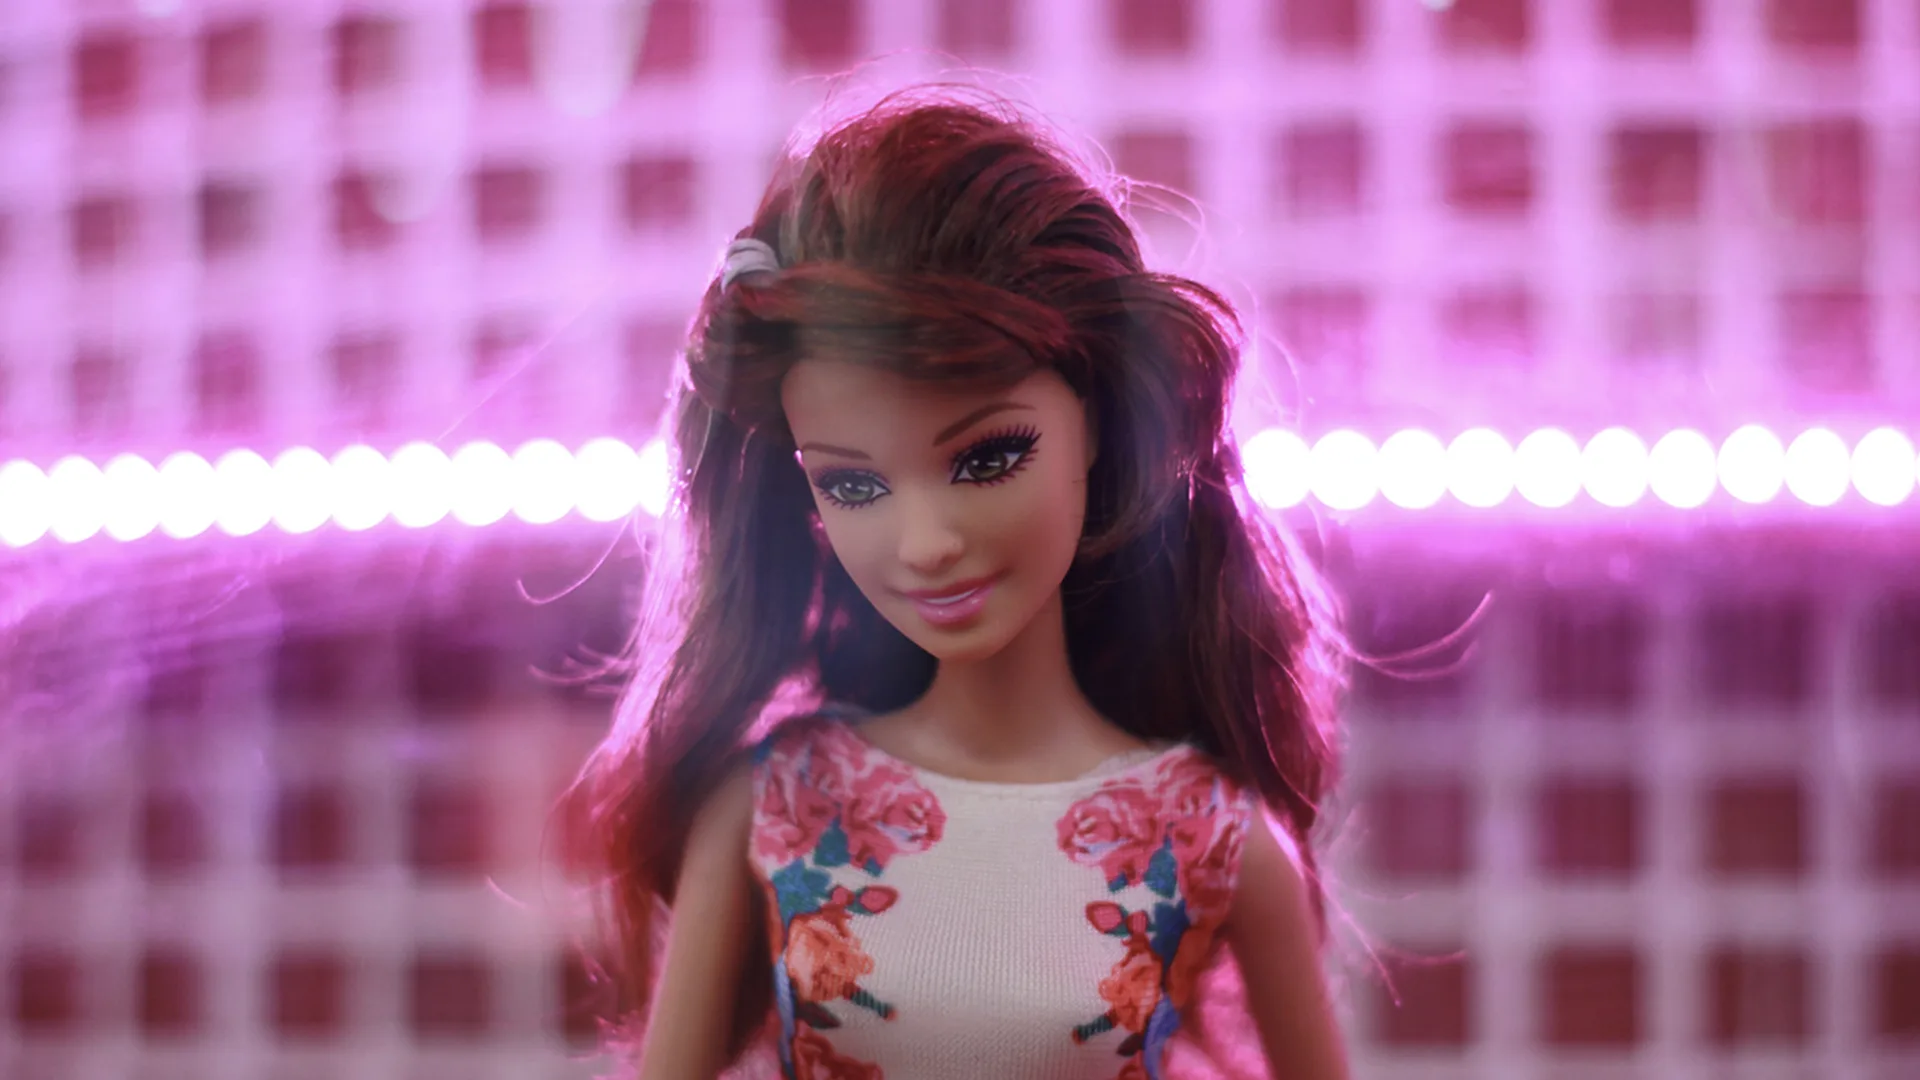 Toy Barbie on a pink lit up background